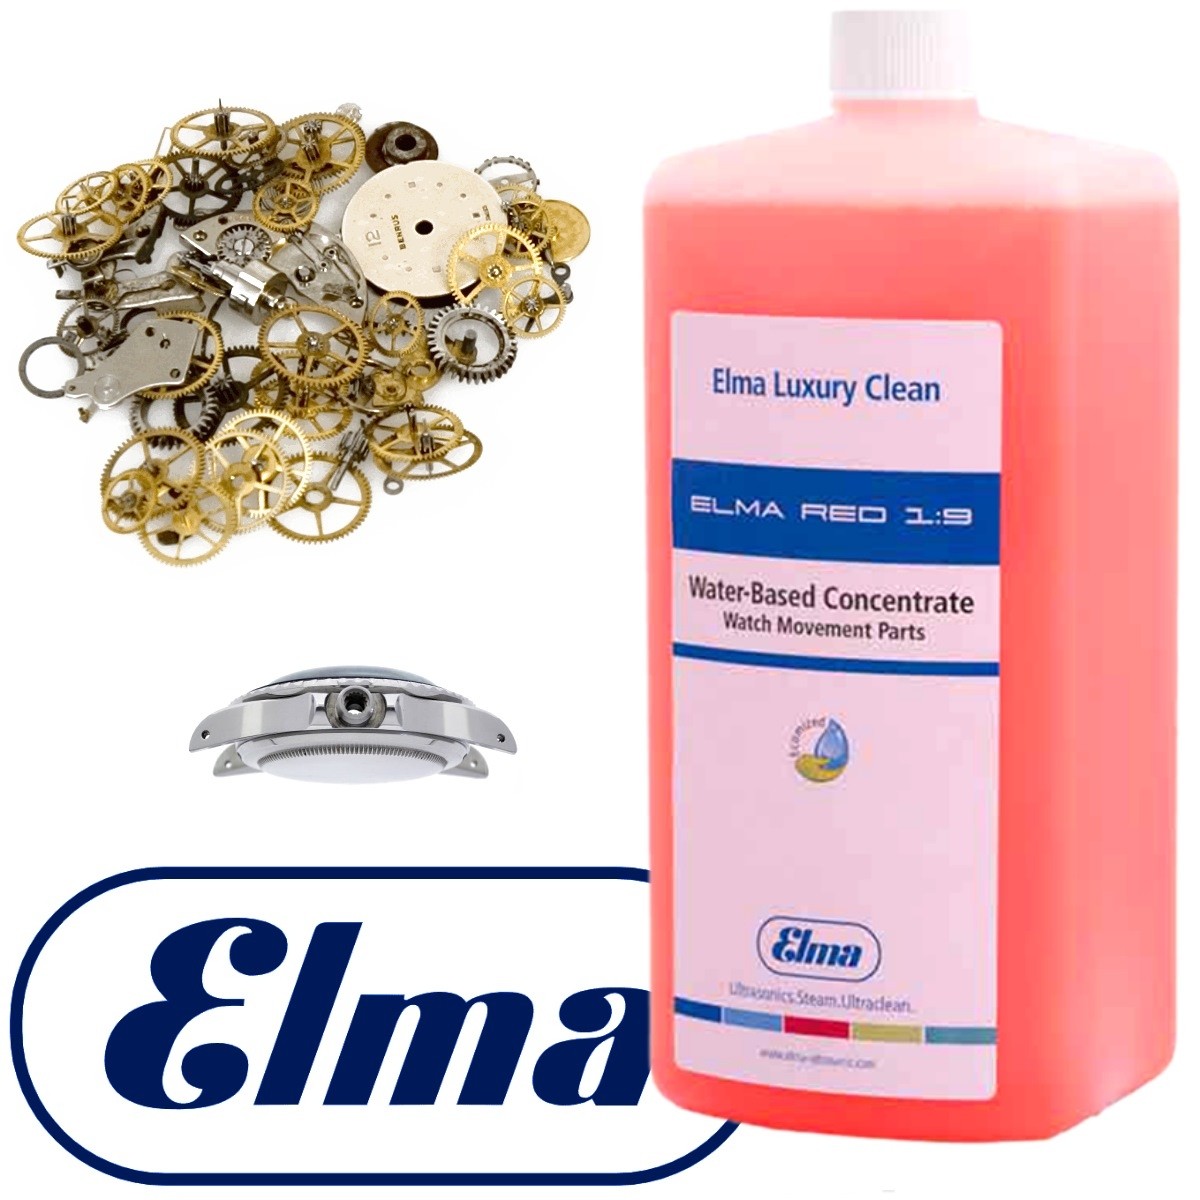 ELMA 1:9 RED watch parts cleaning solution - clean watch movement parts